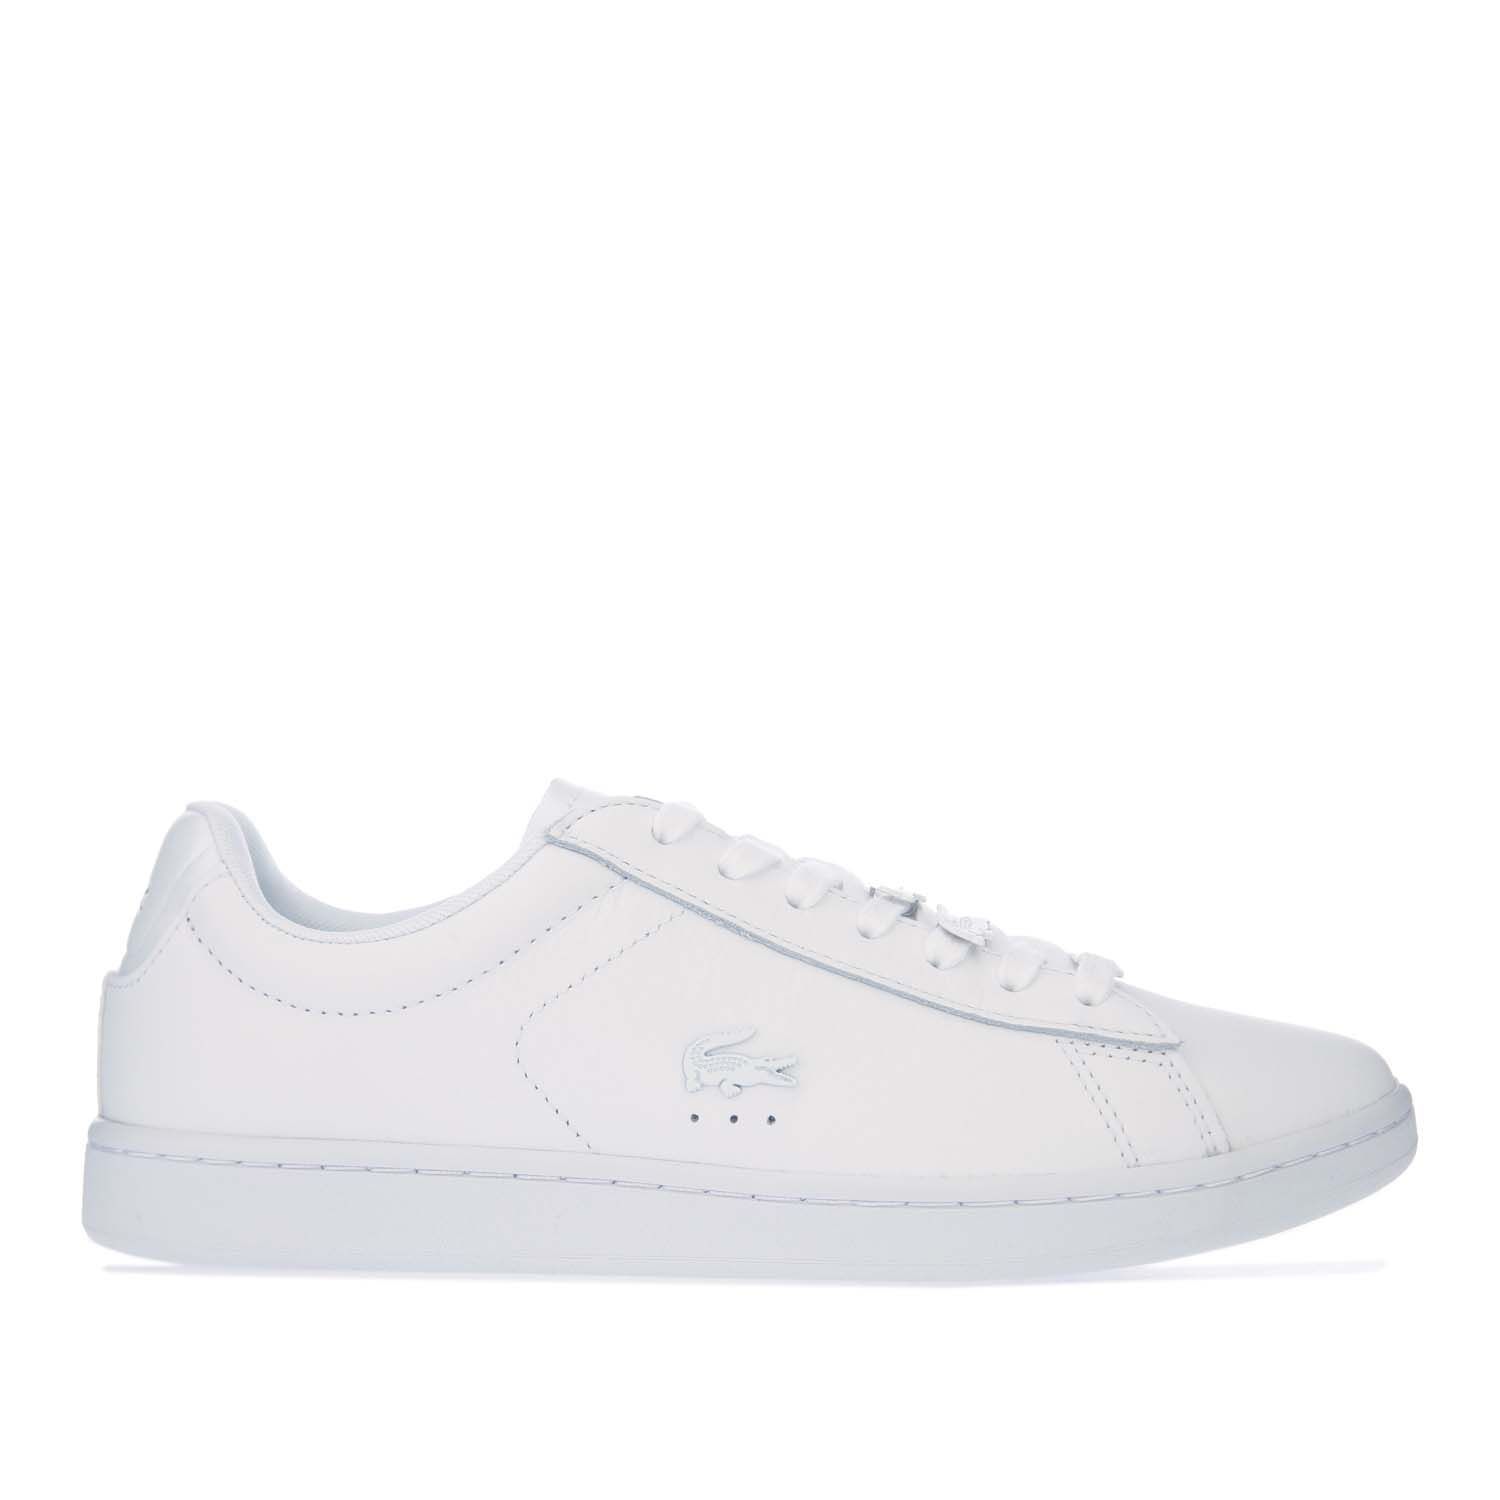 Manier taxi kans Lacoste Carnaby EVO-sneakers voor dames, wit